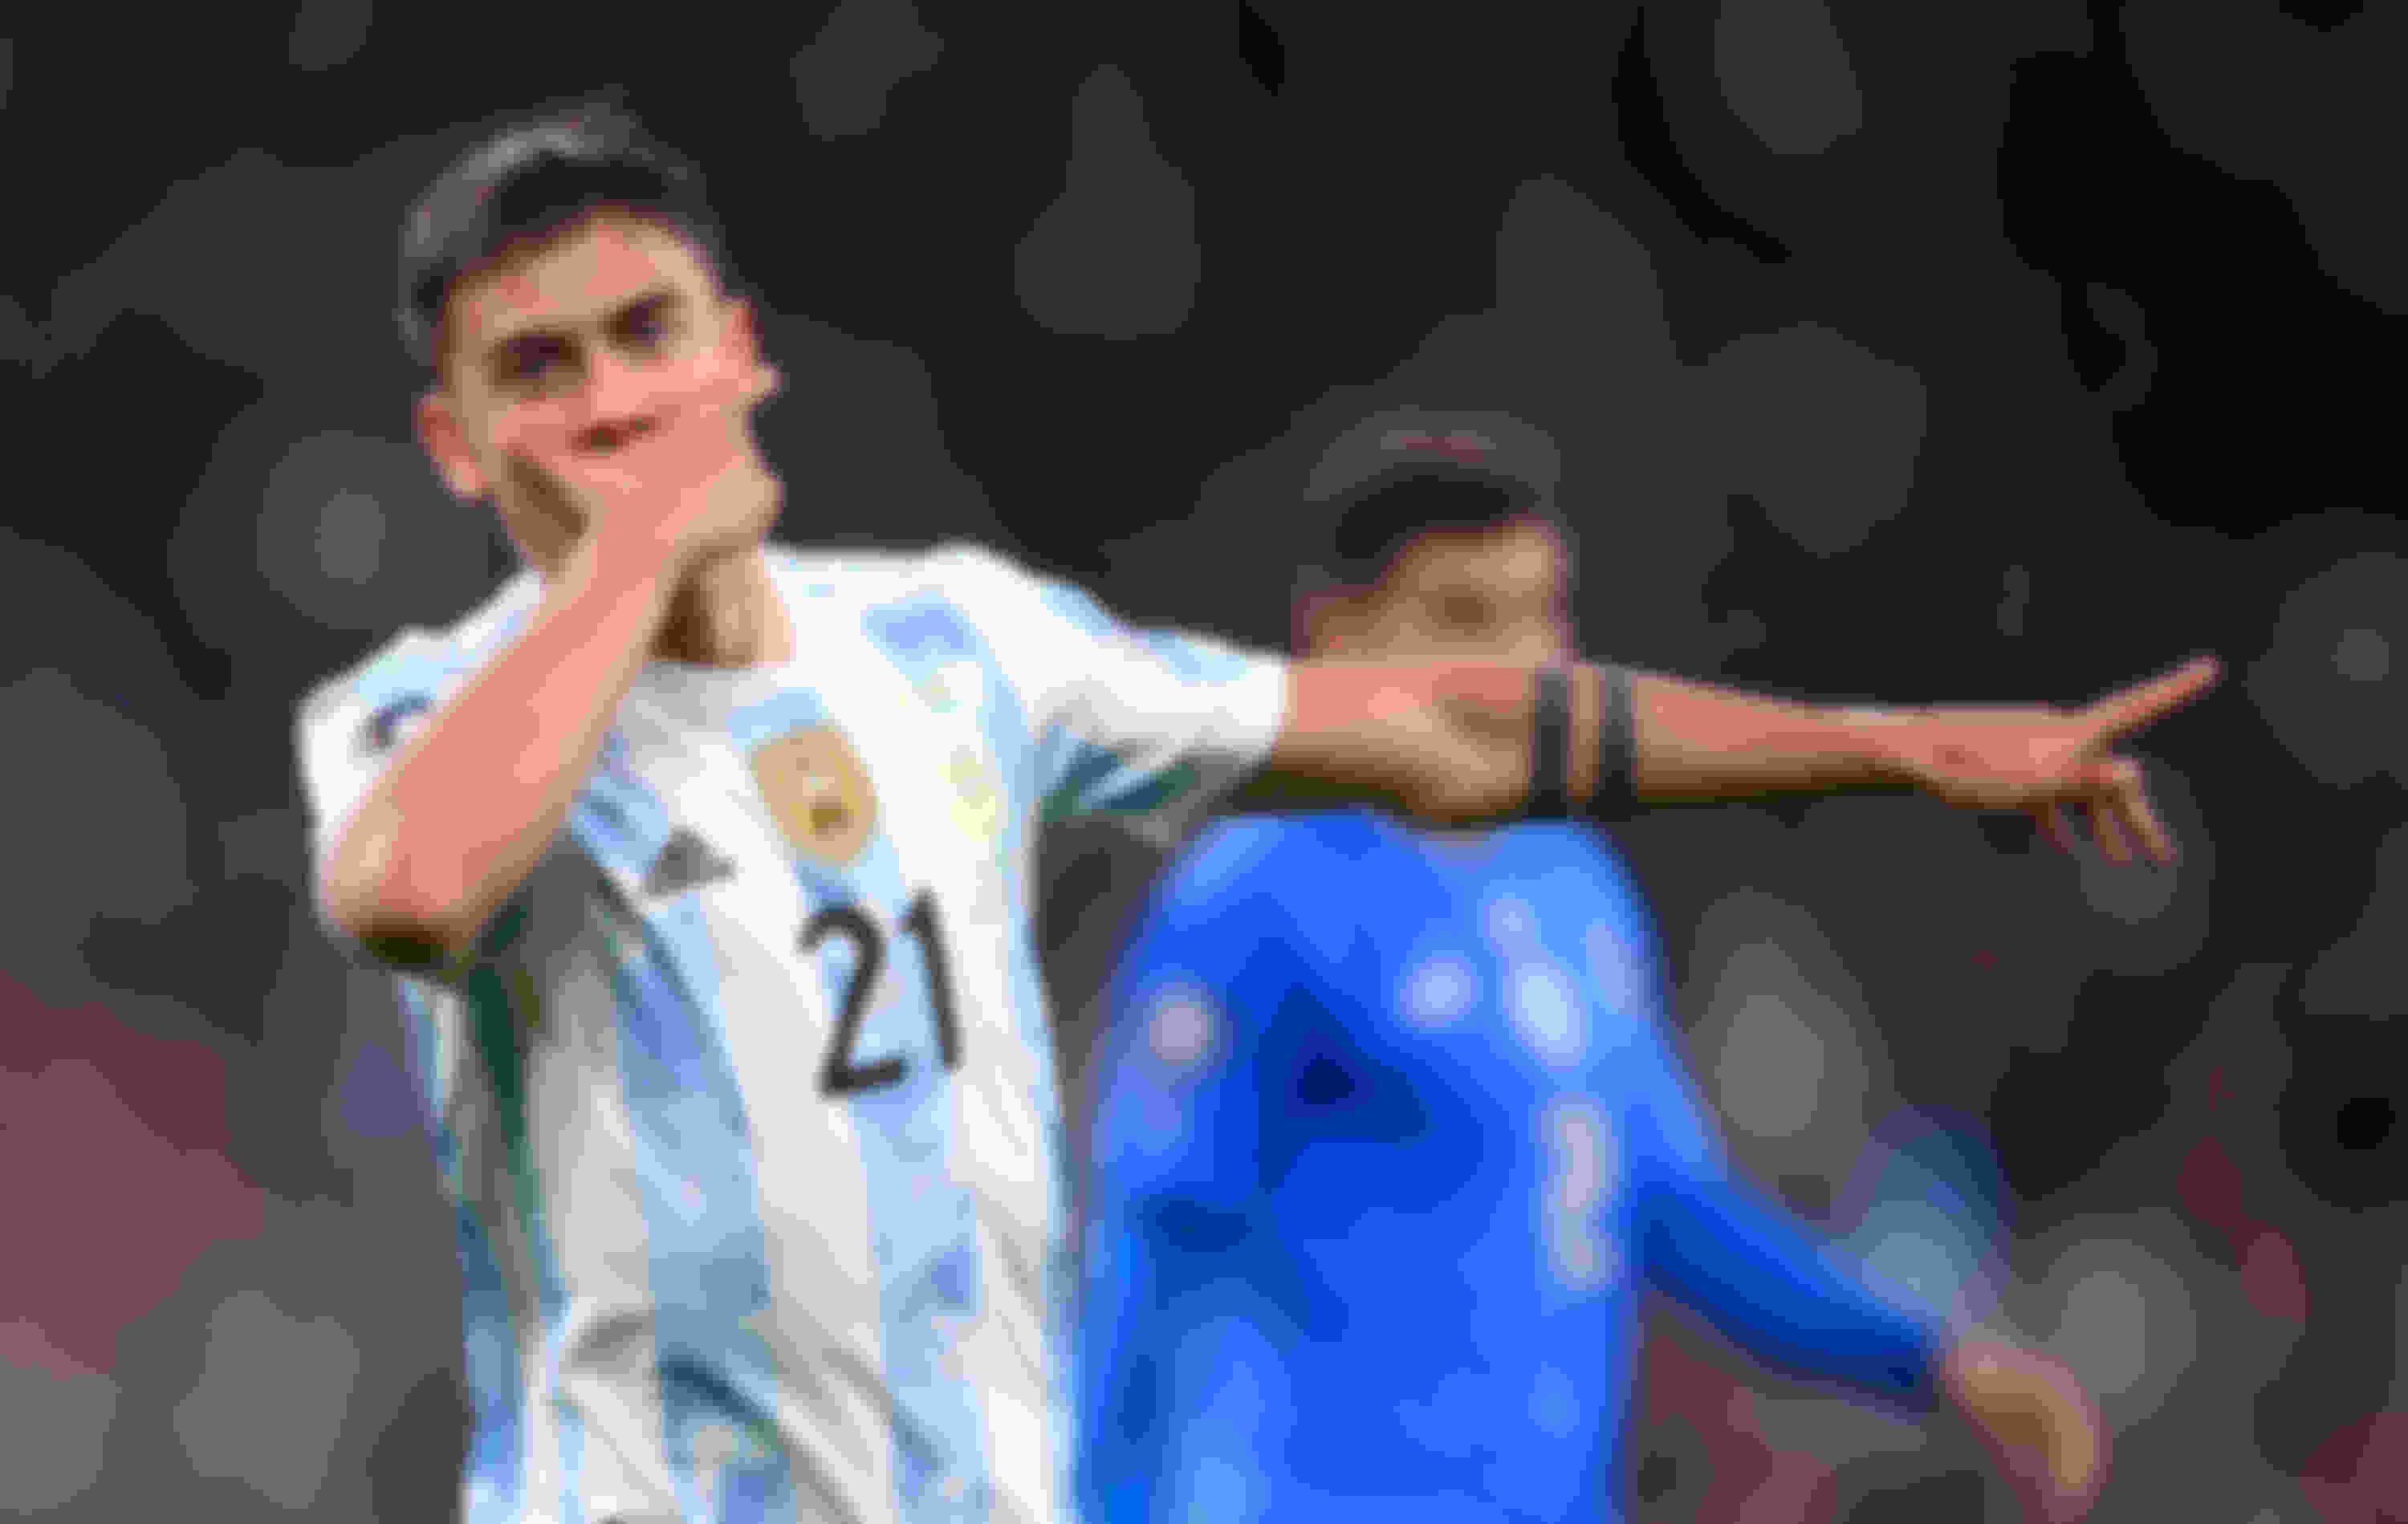 Dybala made the World Cup squad despite an injury scare